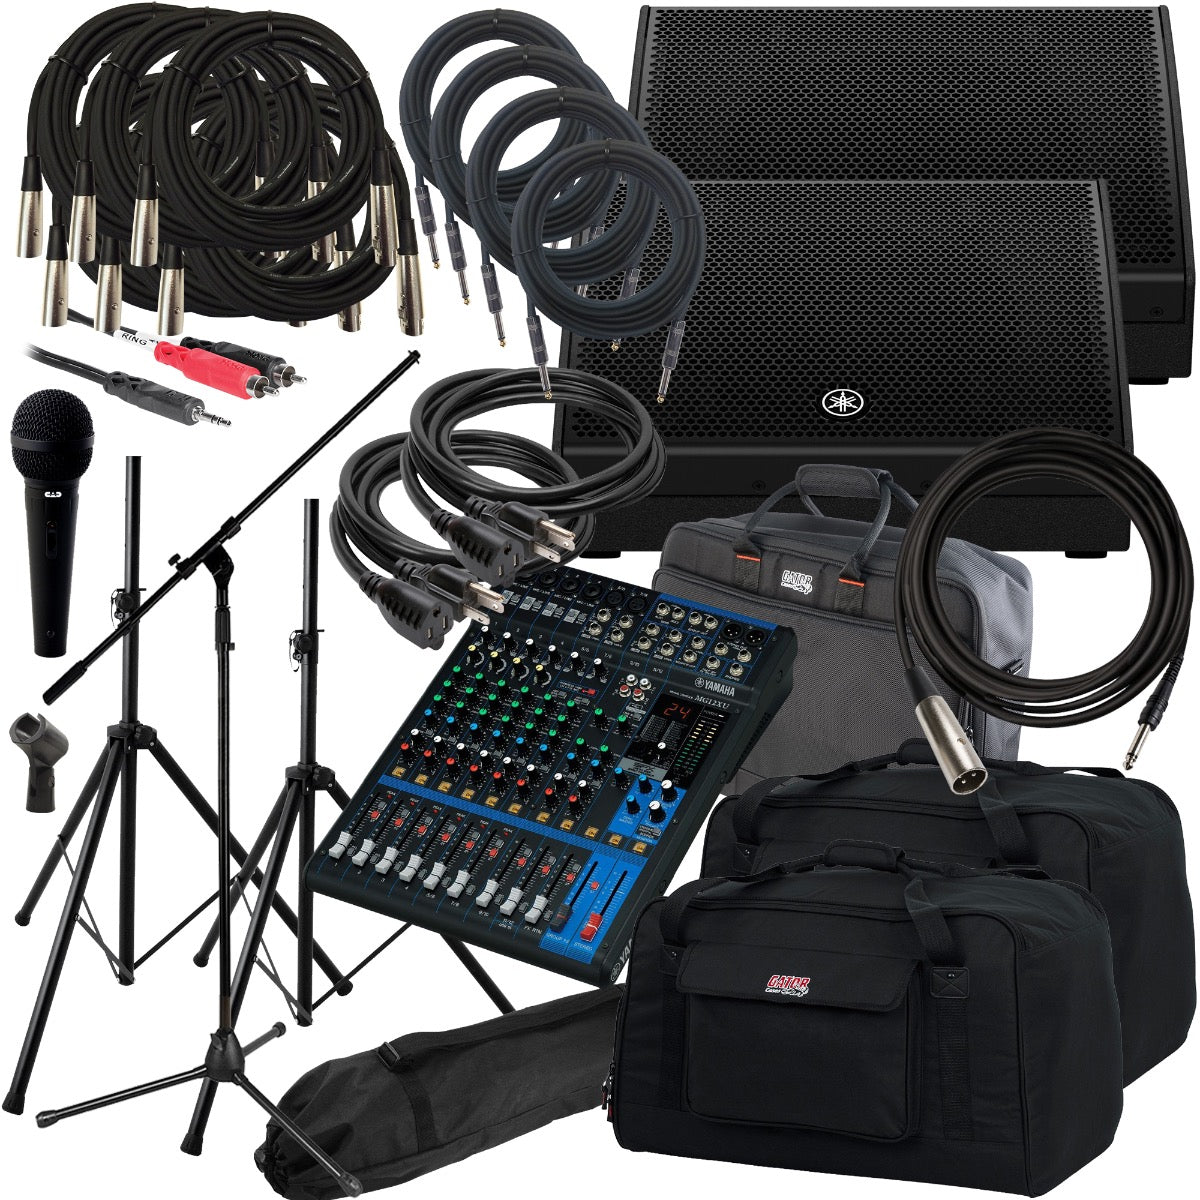 Collage of everything that is included in the Yamaha DHR12M 12" 2-Way Powered Loudspeaker COMPLETE AUDIO BUNDLE